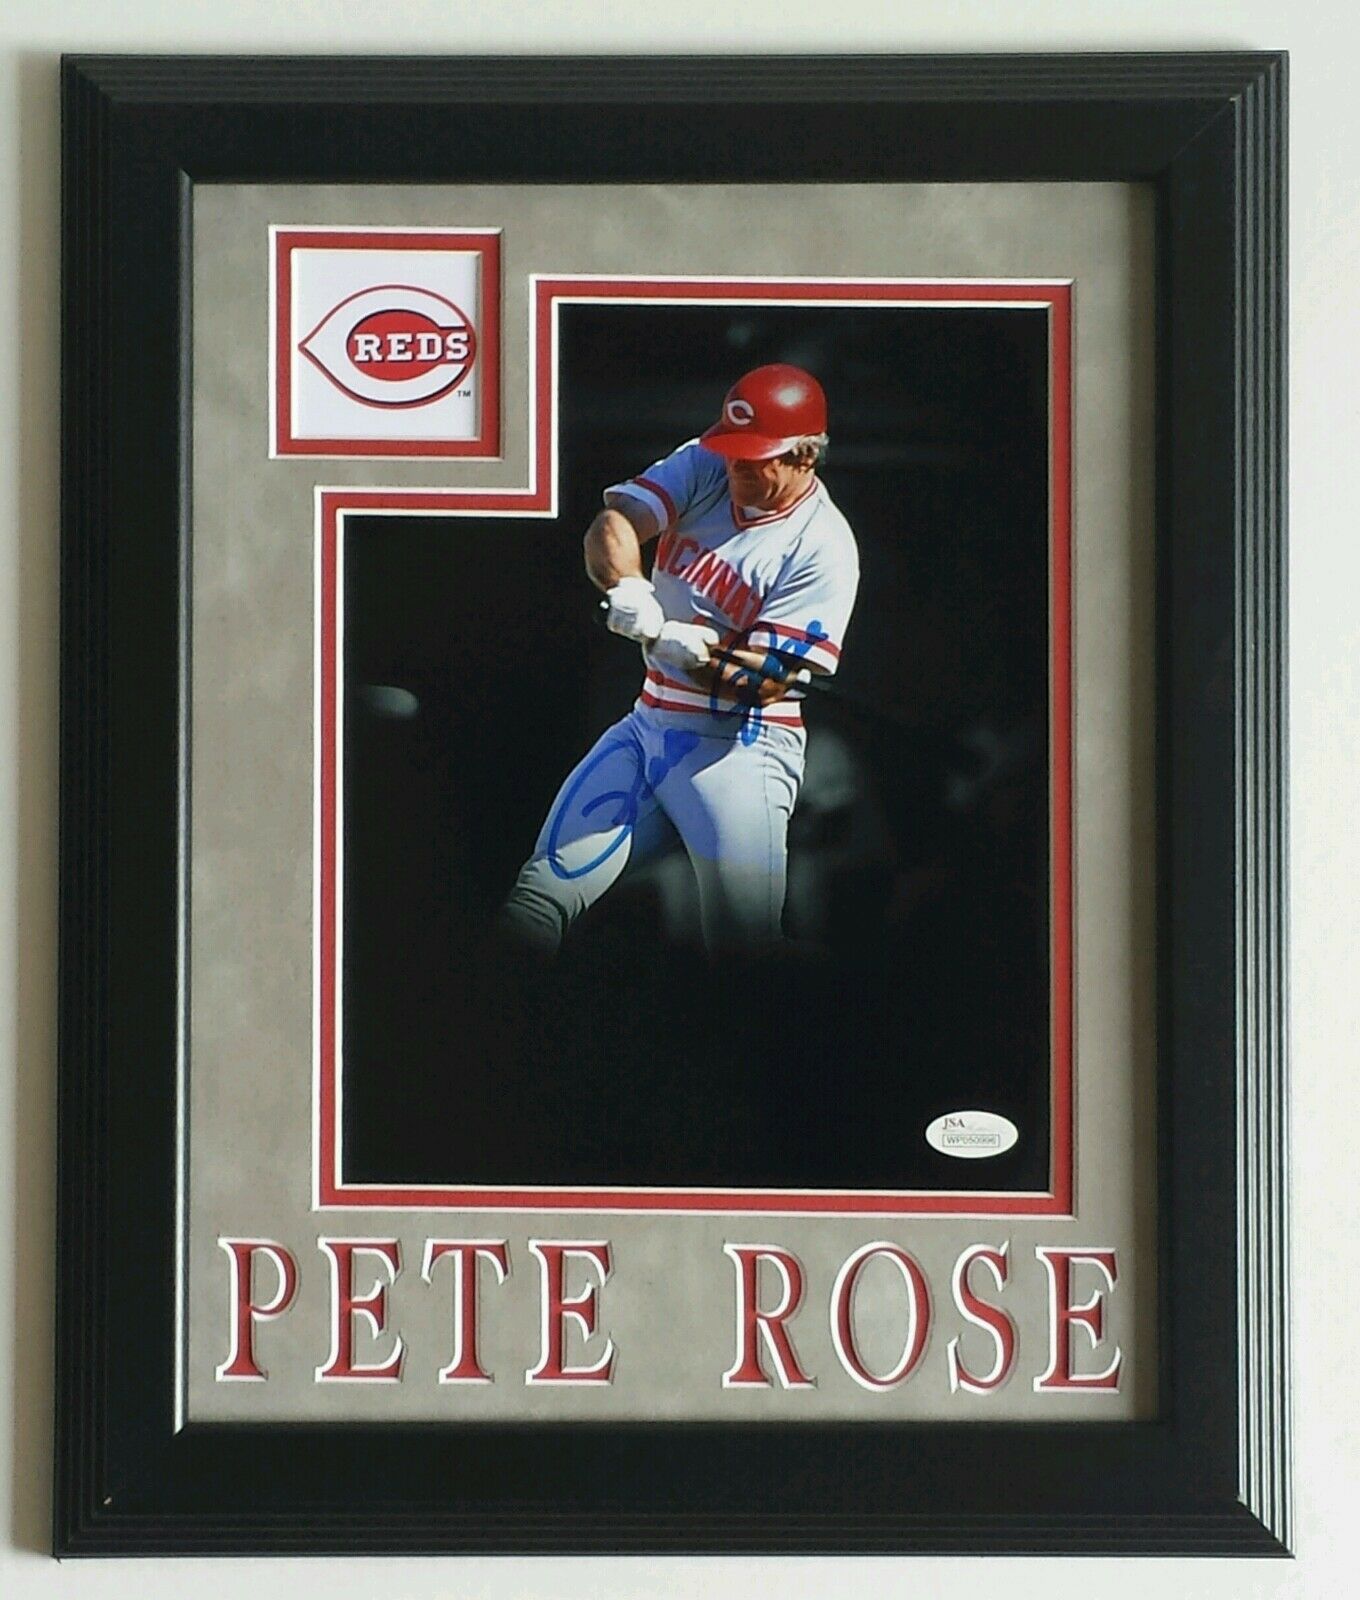 Pete Rose Authentic Signed Framed 8x10 Photo Autographed JSA